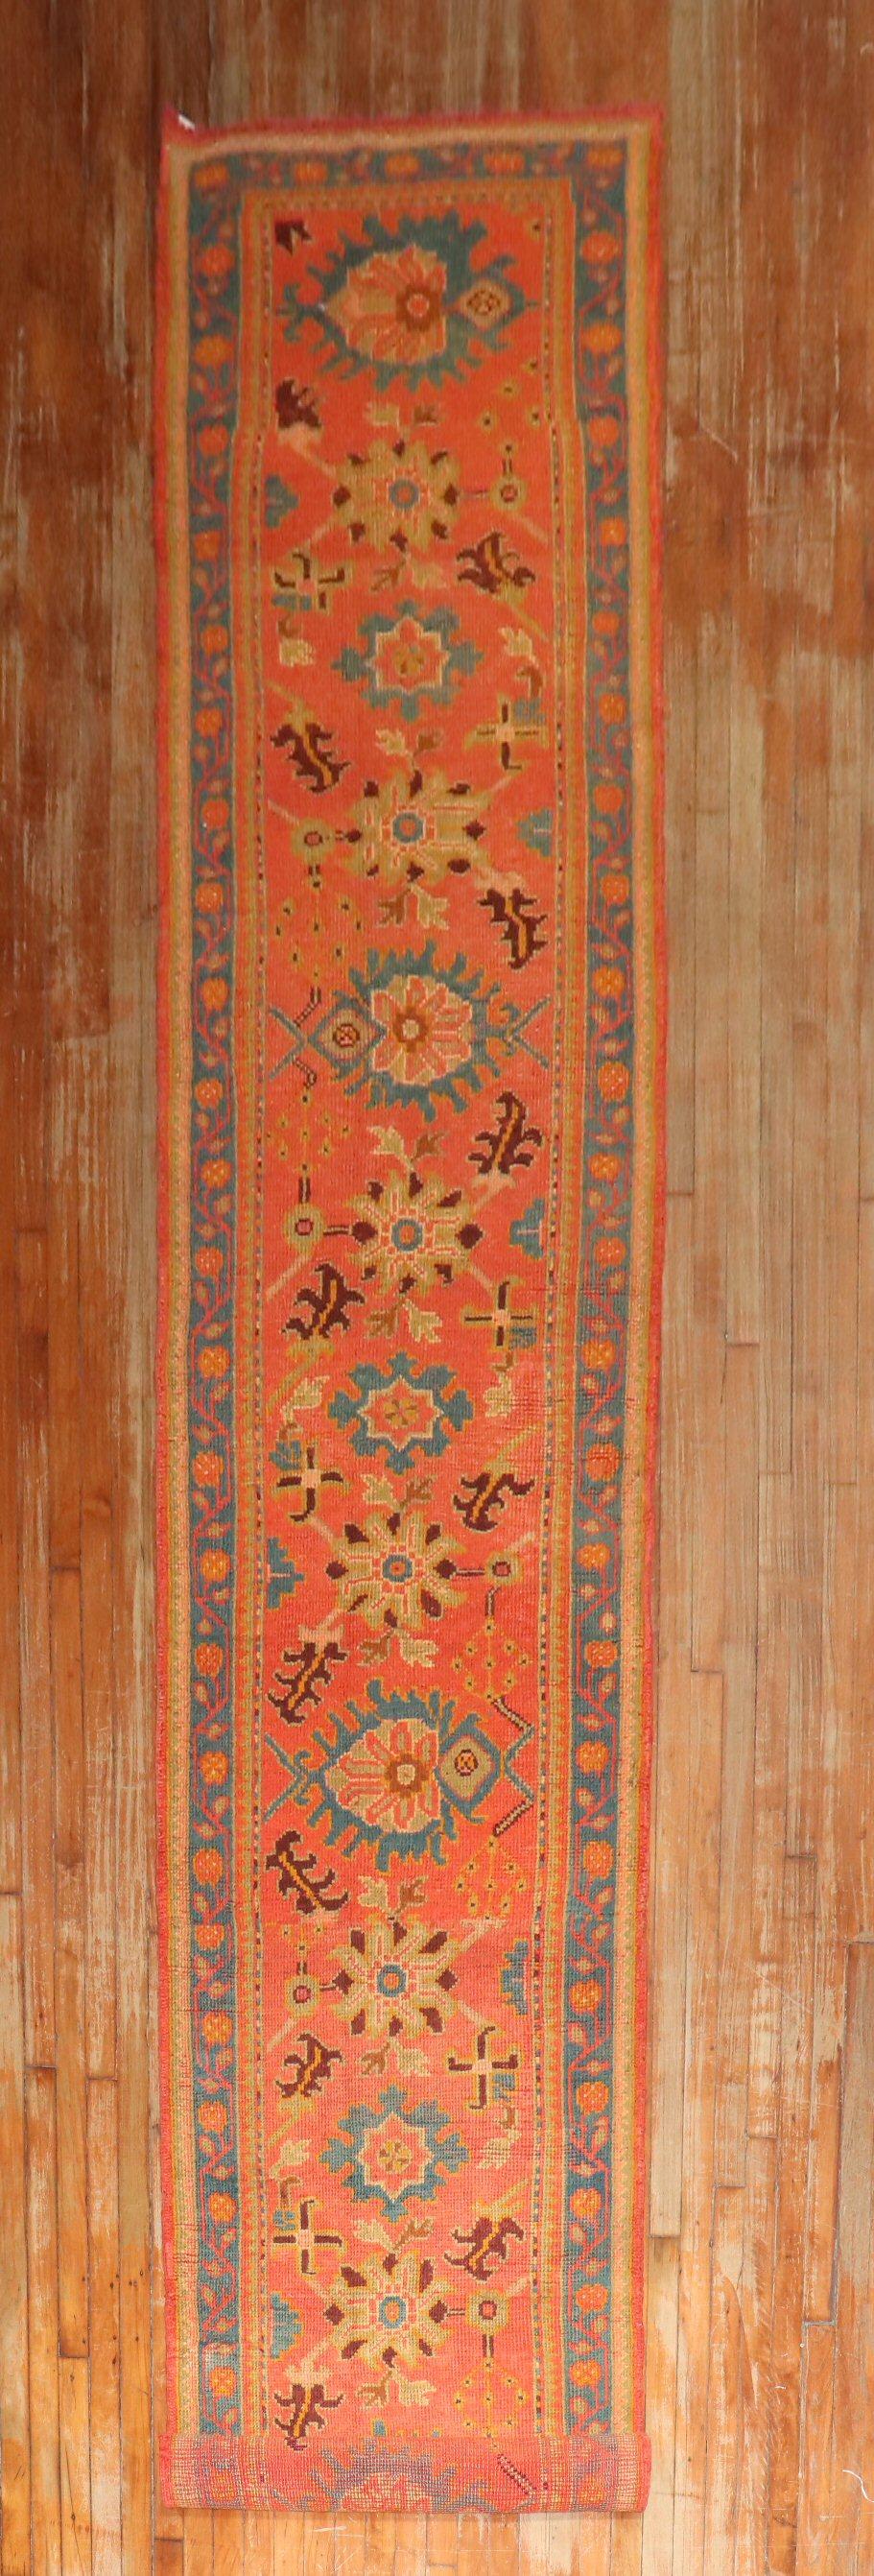 An early 20th century colorful bright orange field long and narrow Oushak Runner. Not many old runners made this long from the Oushak region. this was most probably a custom order at the time

2'11'' x 18'10''.